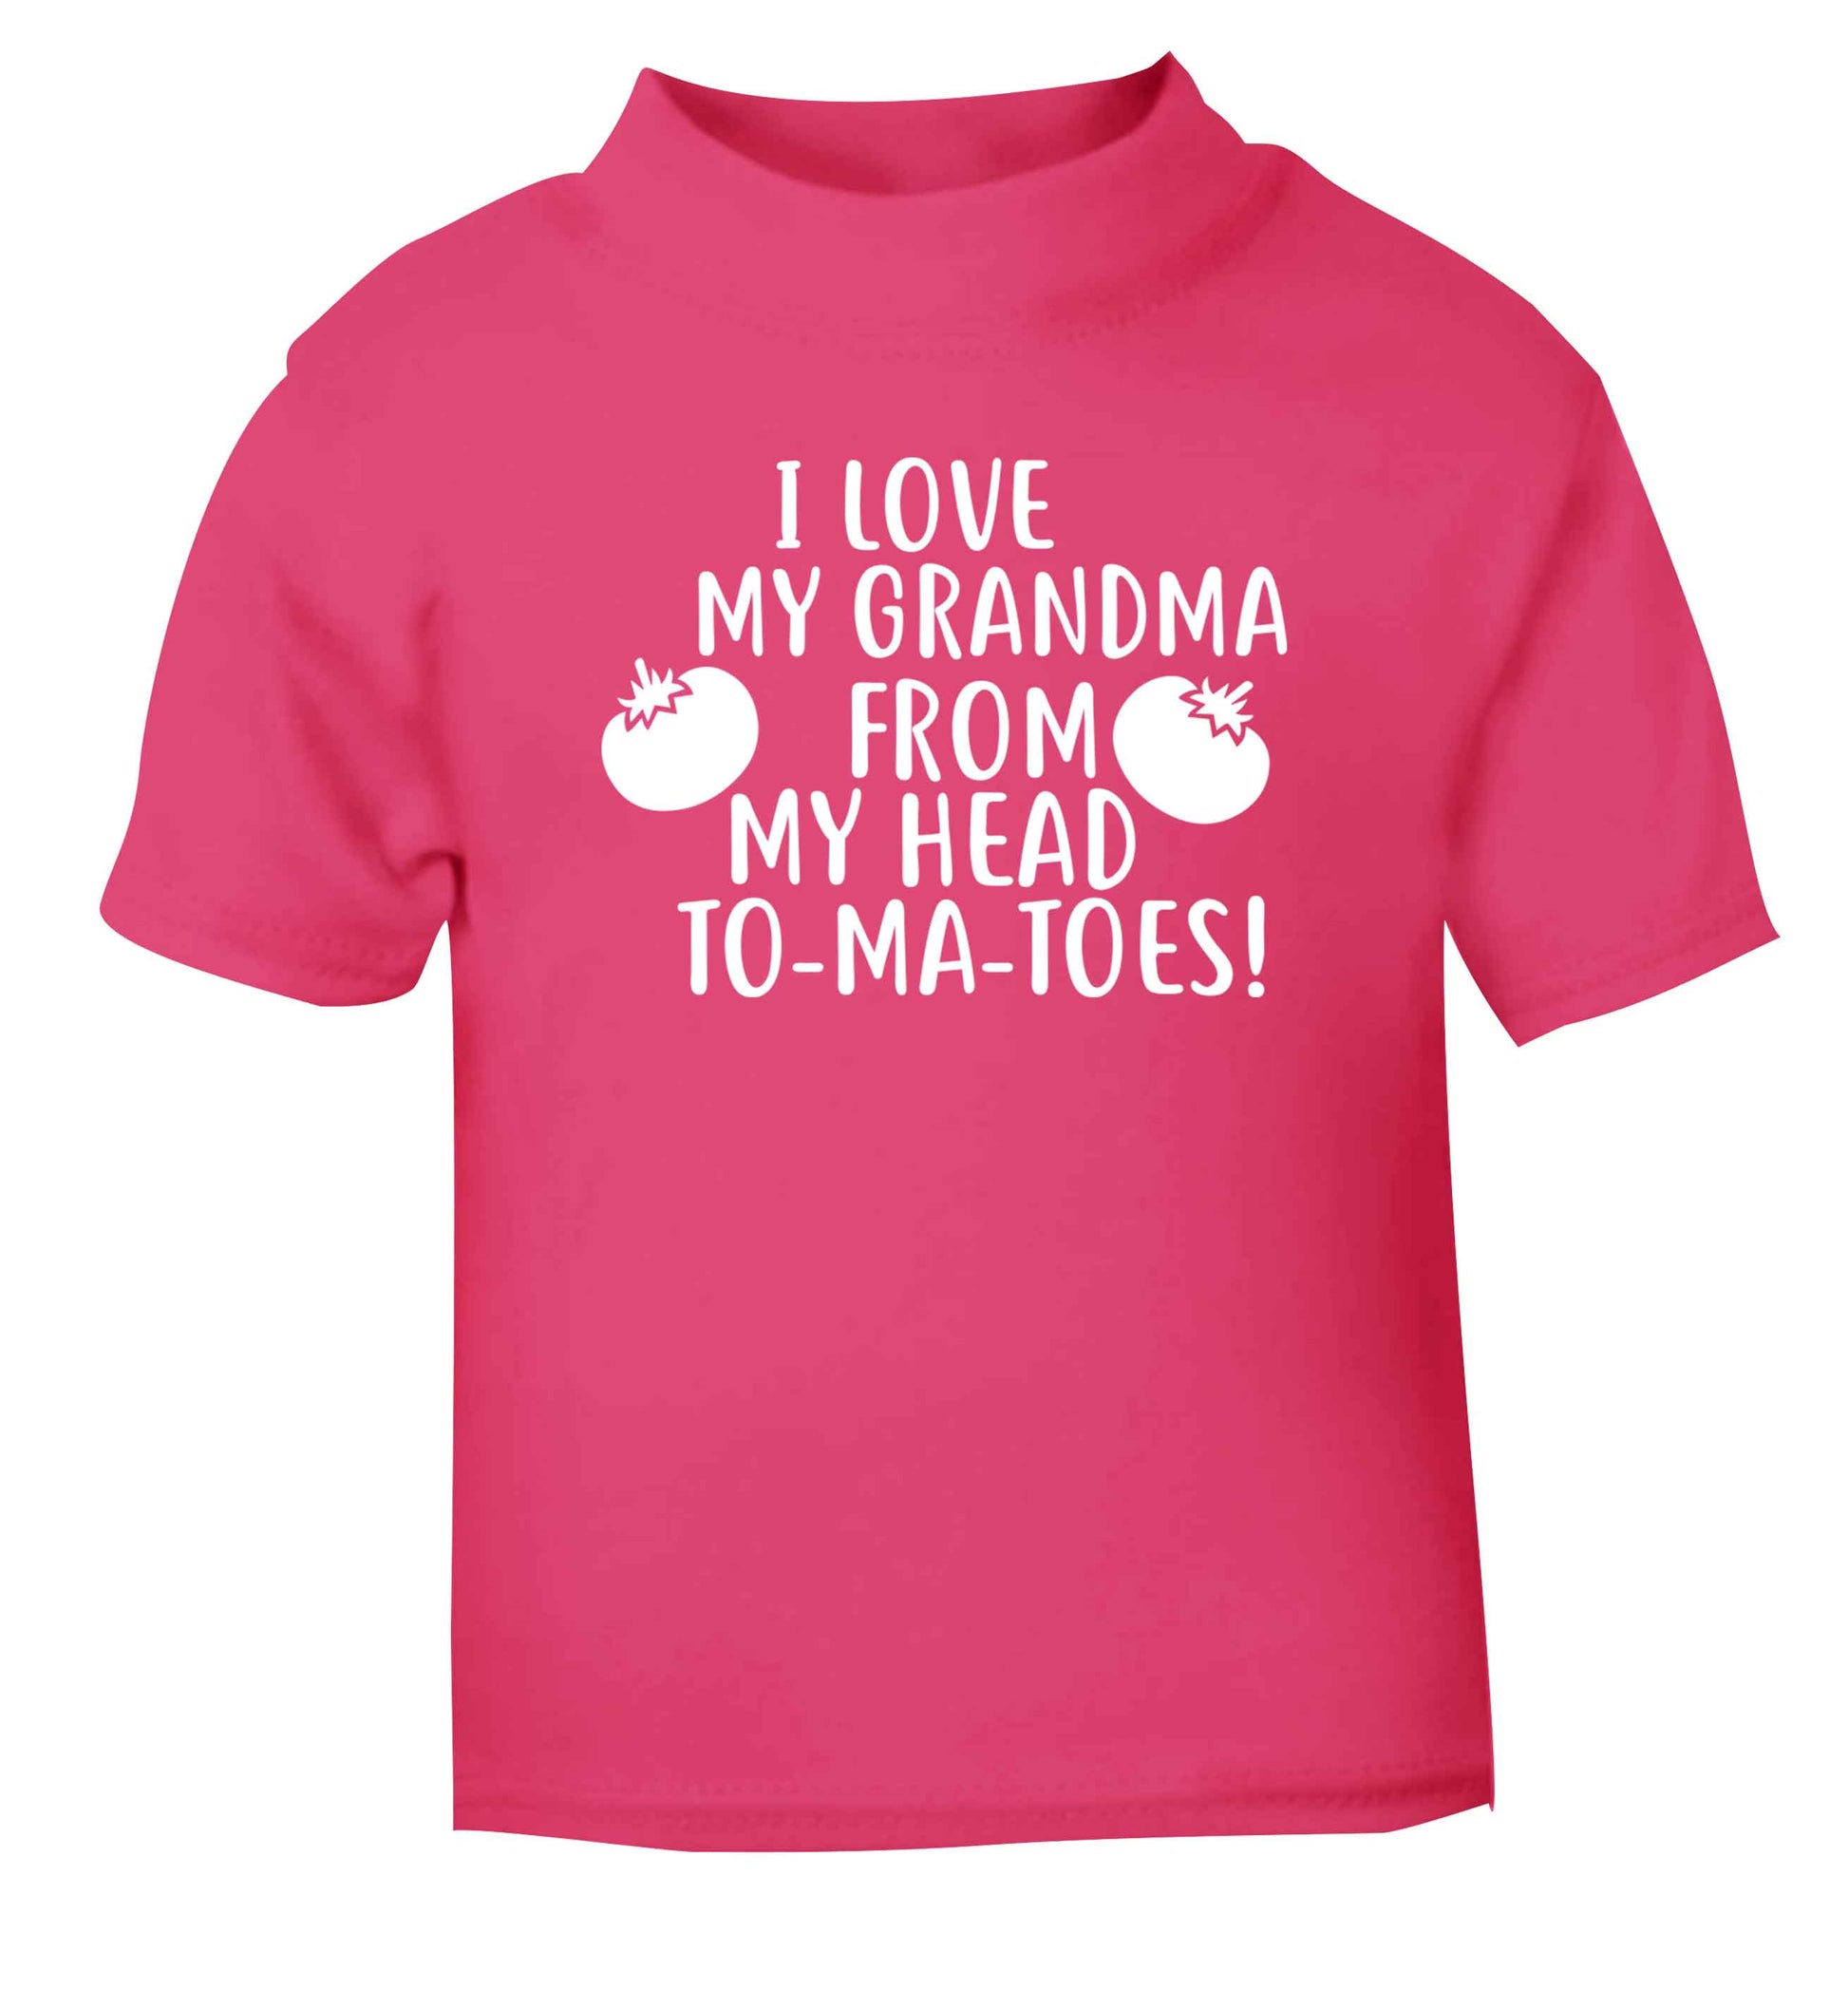 I love my grandma from my head to-ma-toes pink Baby Toddler Tshirt 2 Years